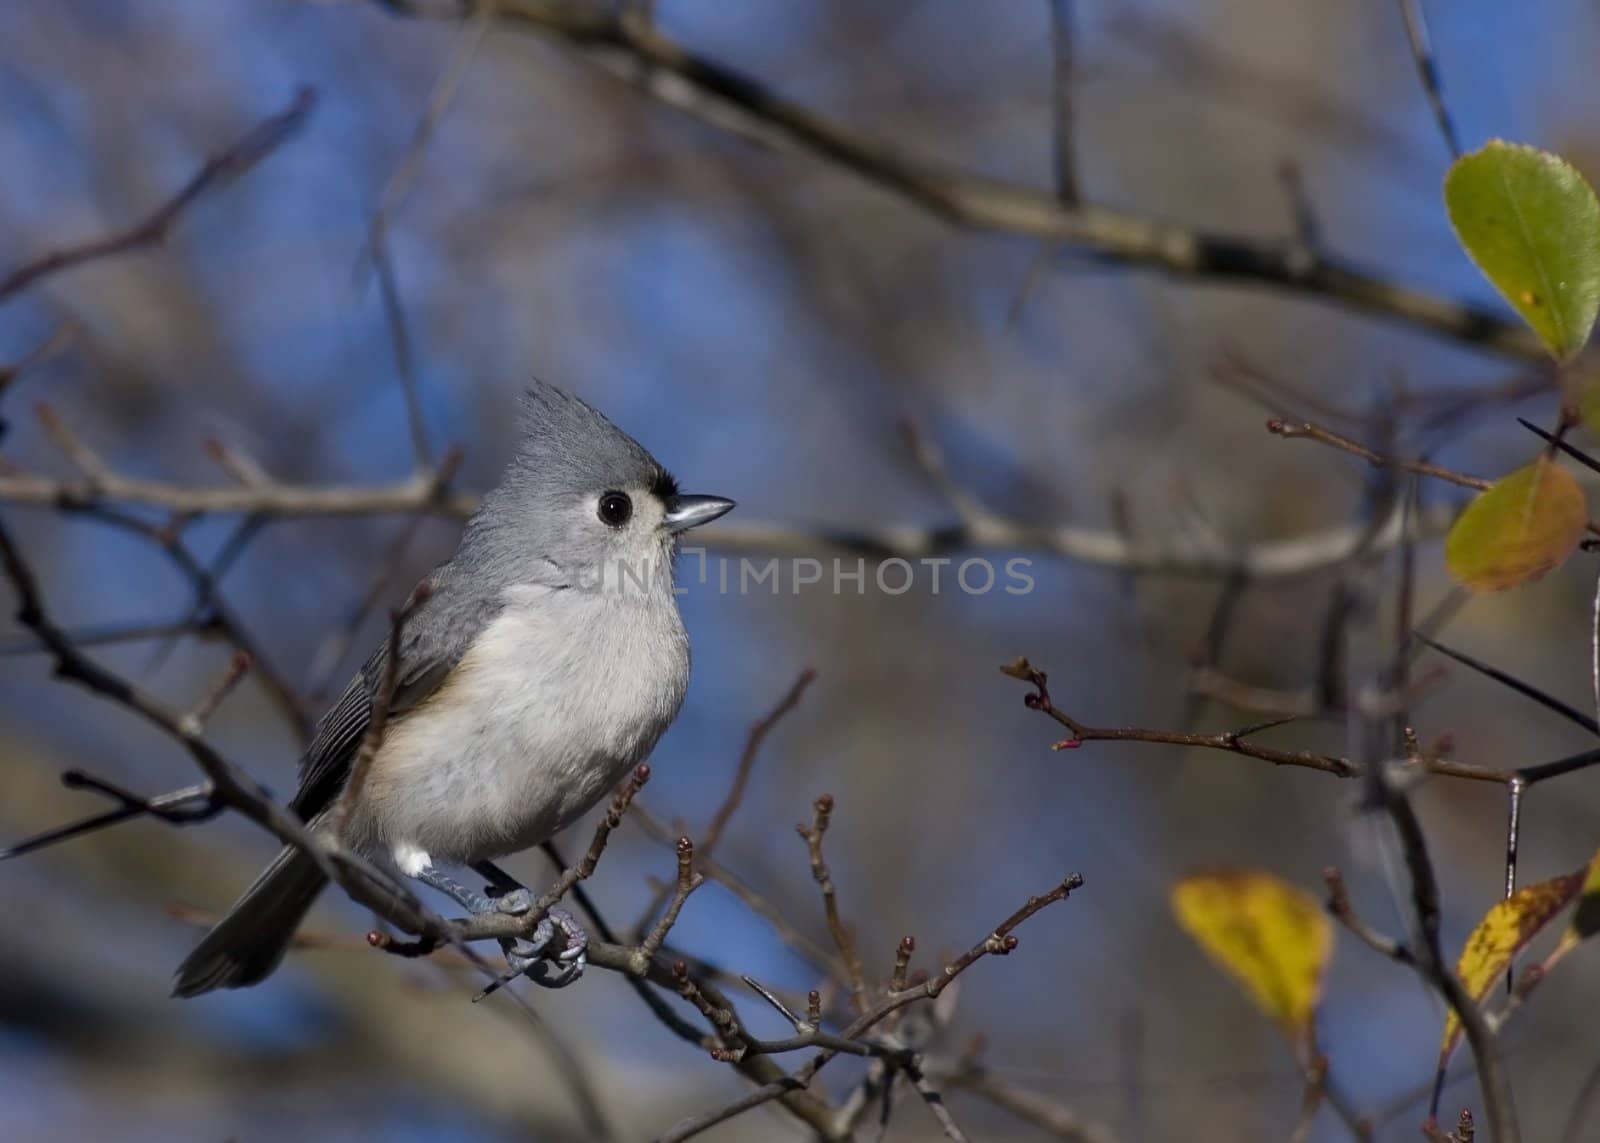 Titmouse perched on a branch.